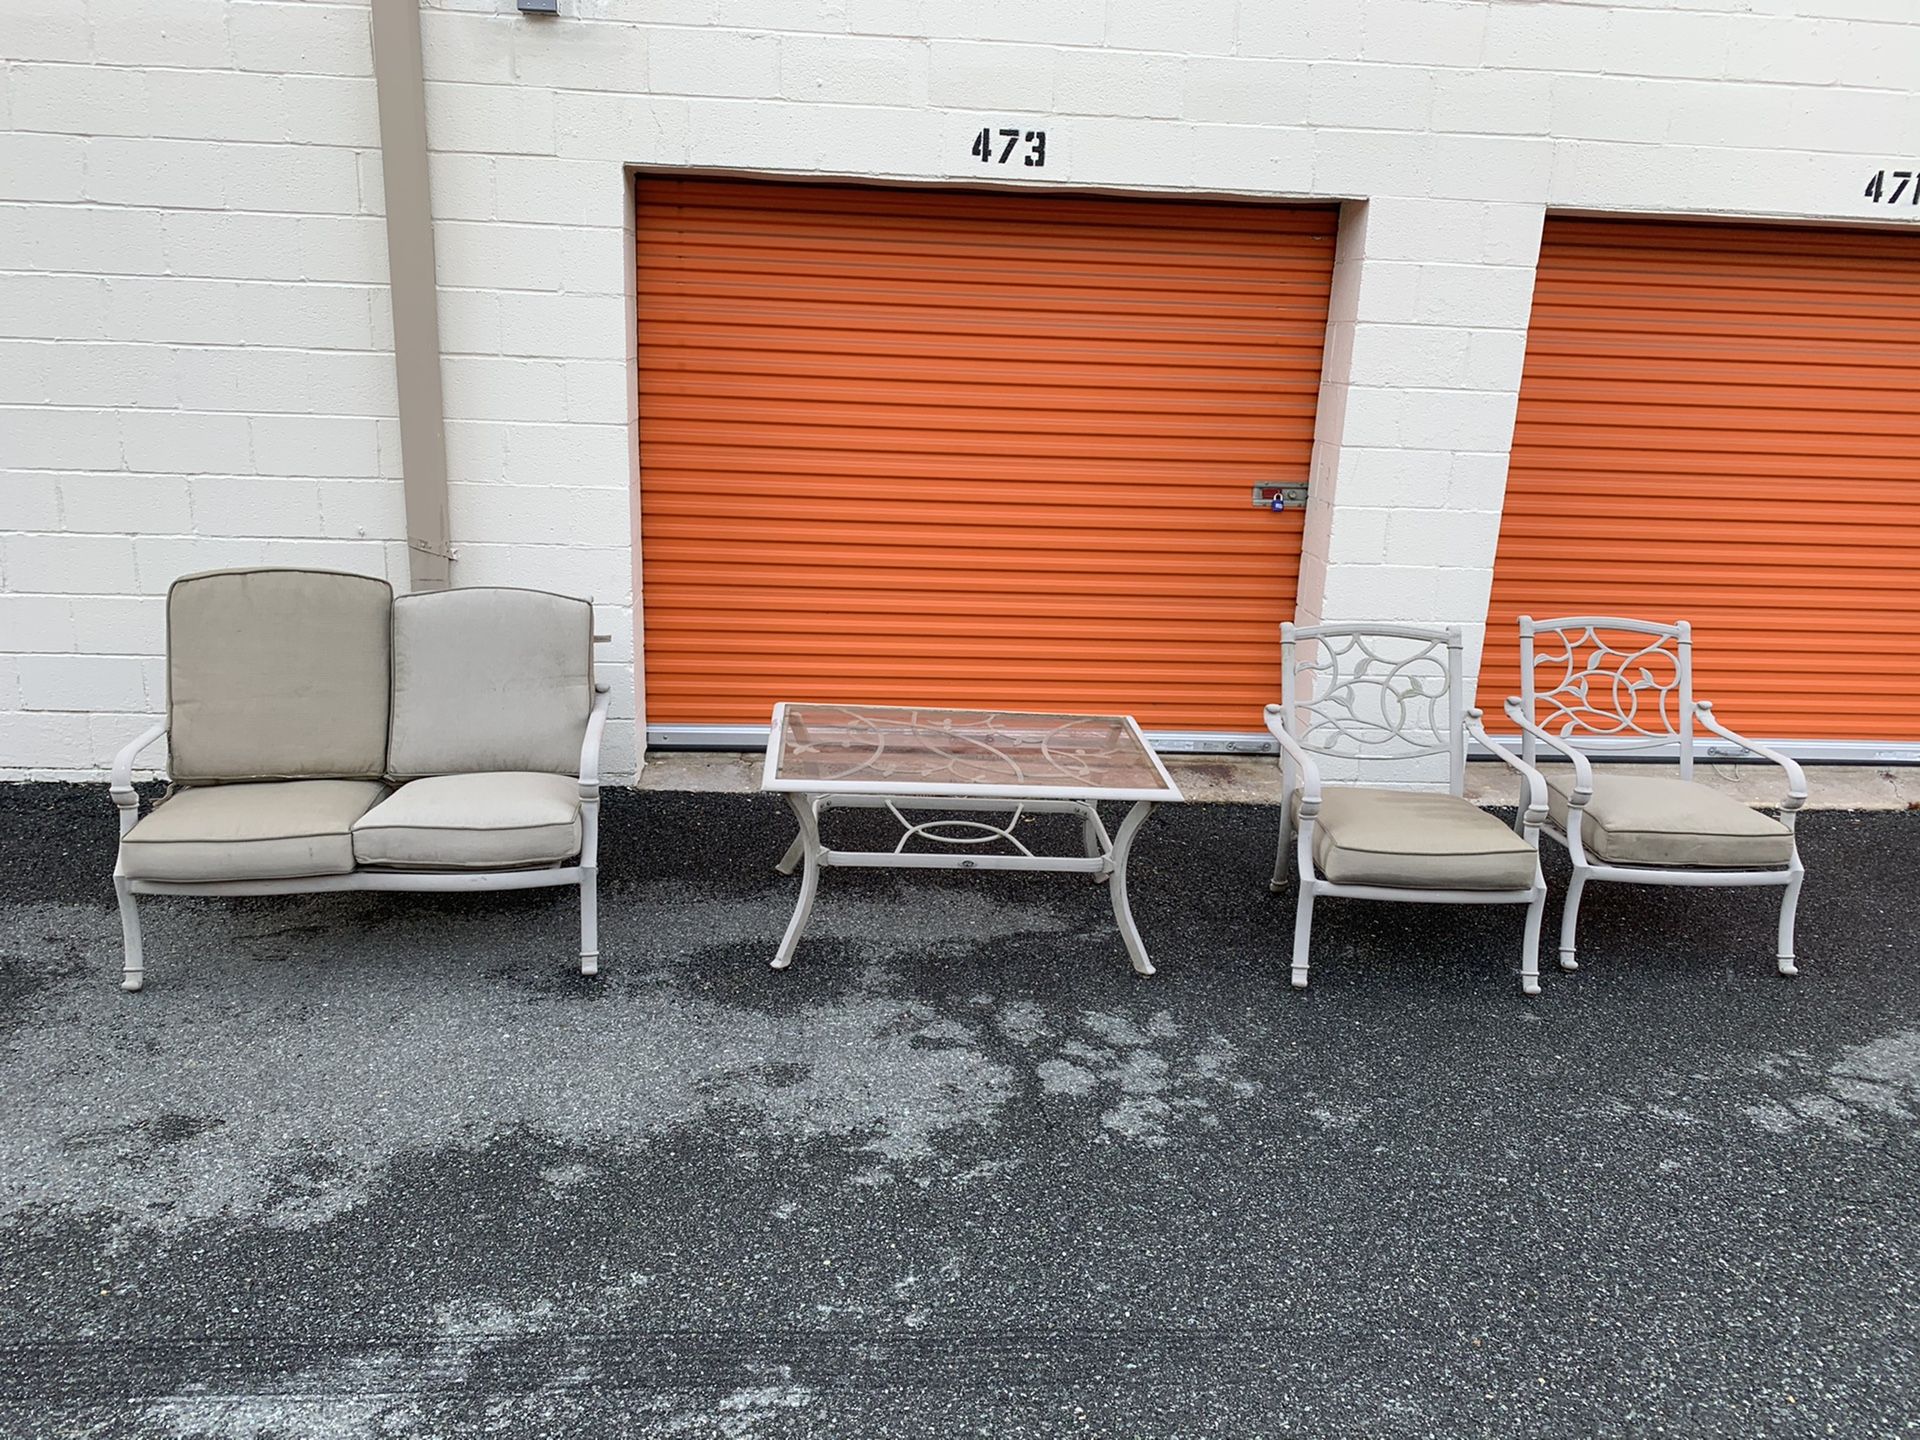 Hampton Bay patio set bench, 2 chairs, and a table w/ cushions OBO